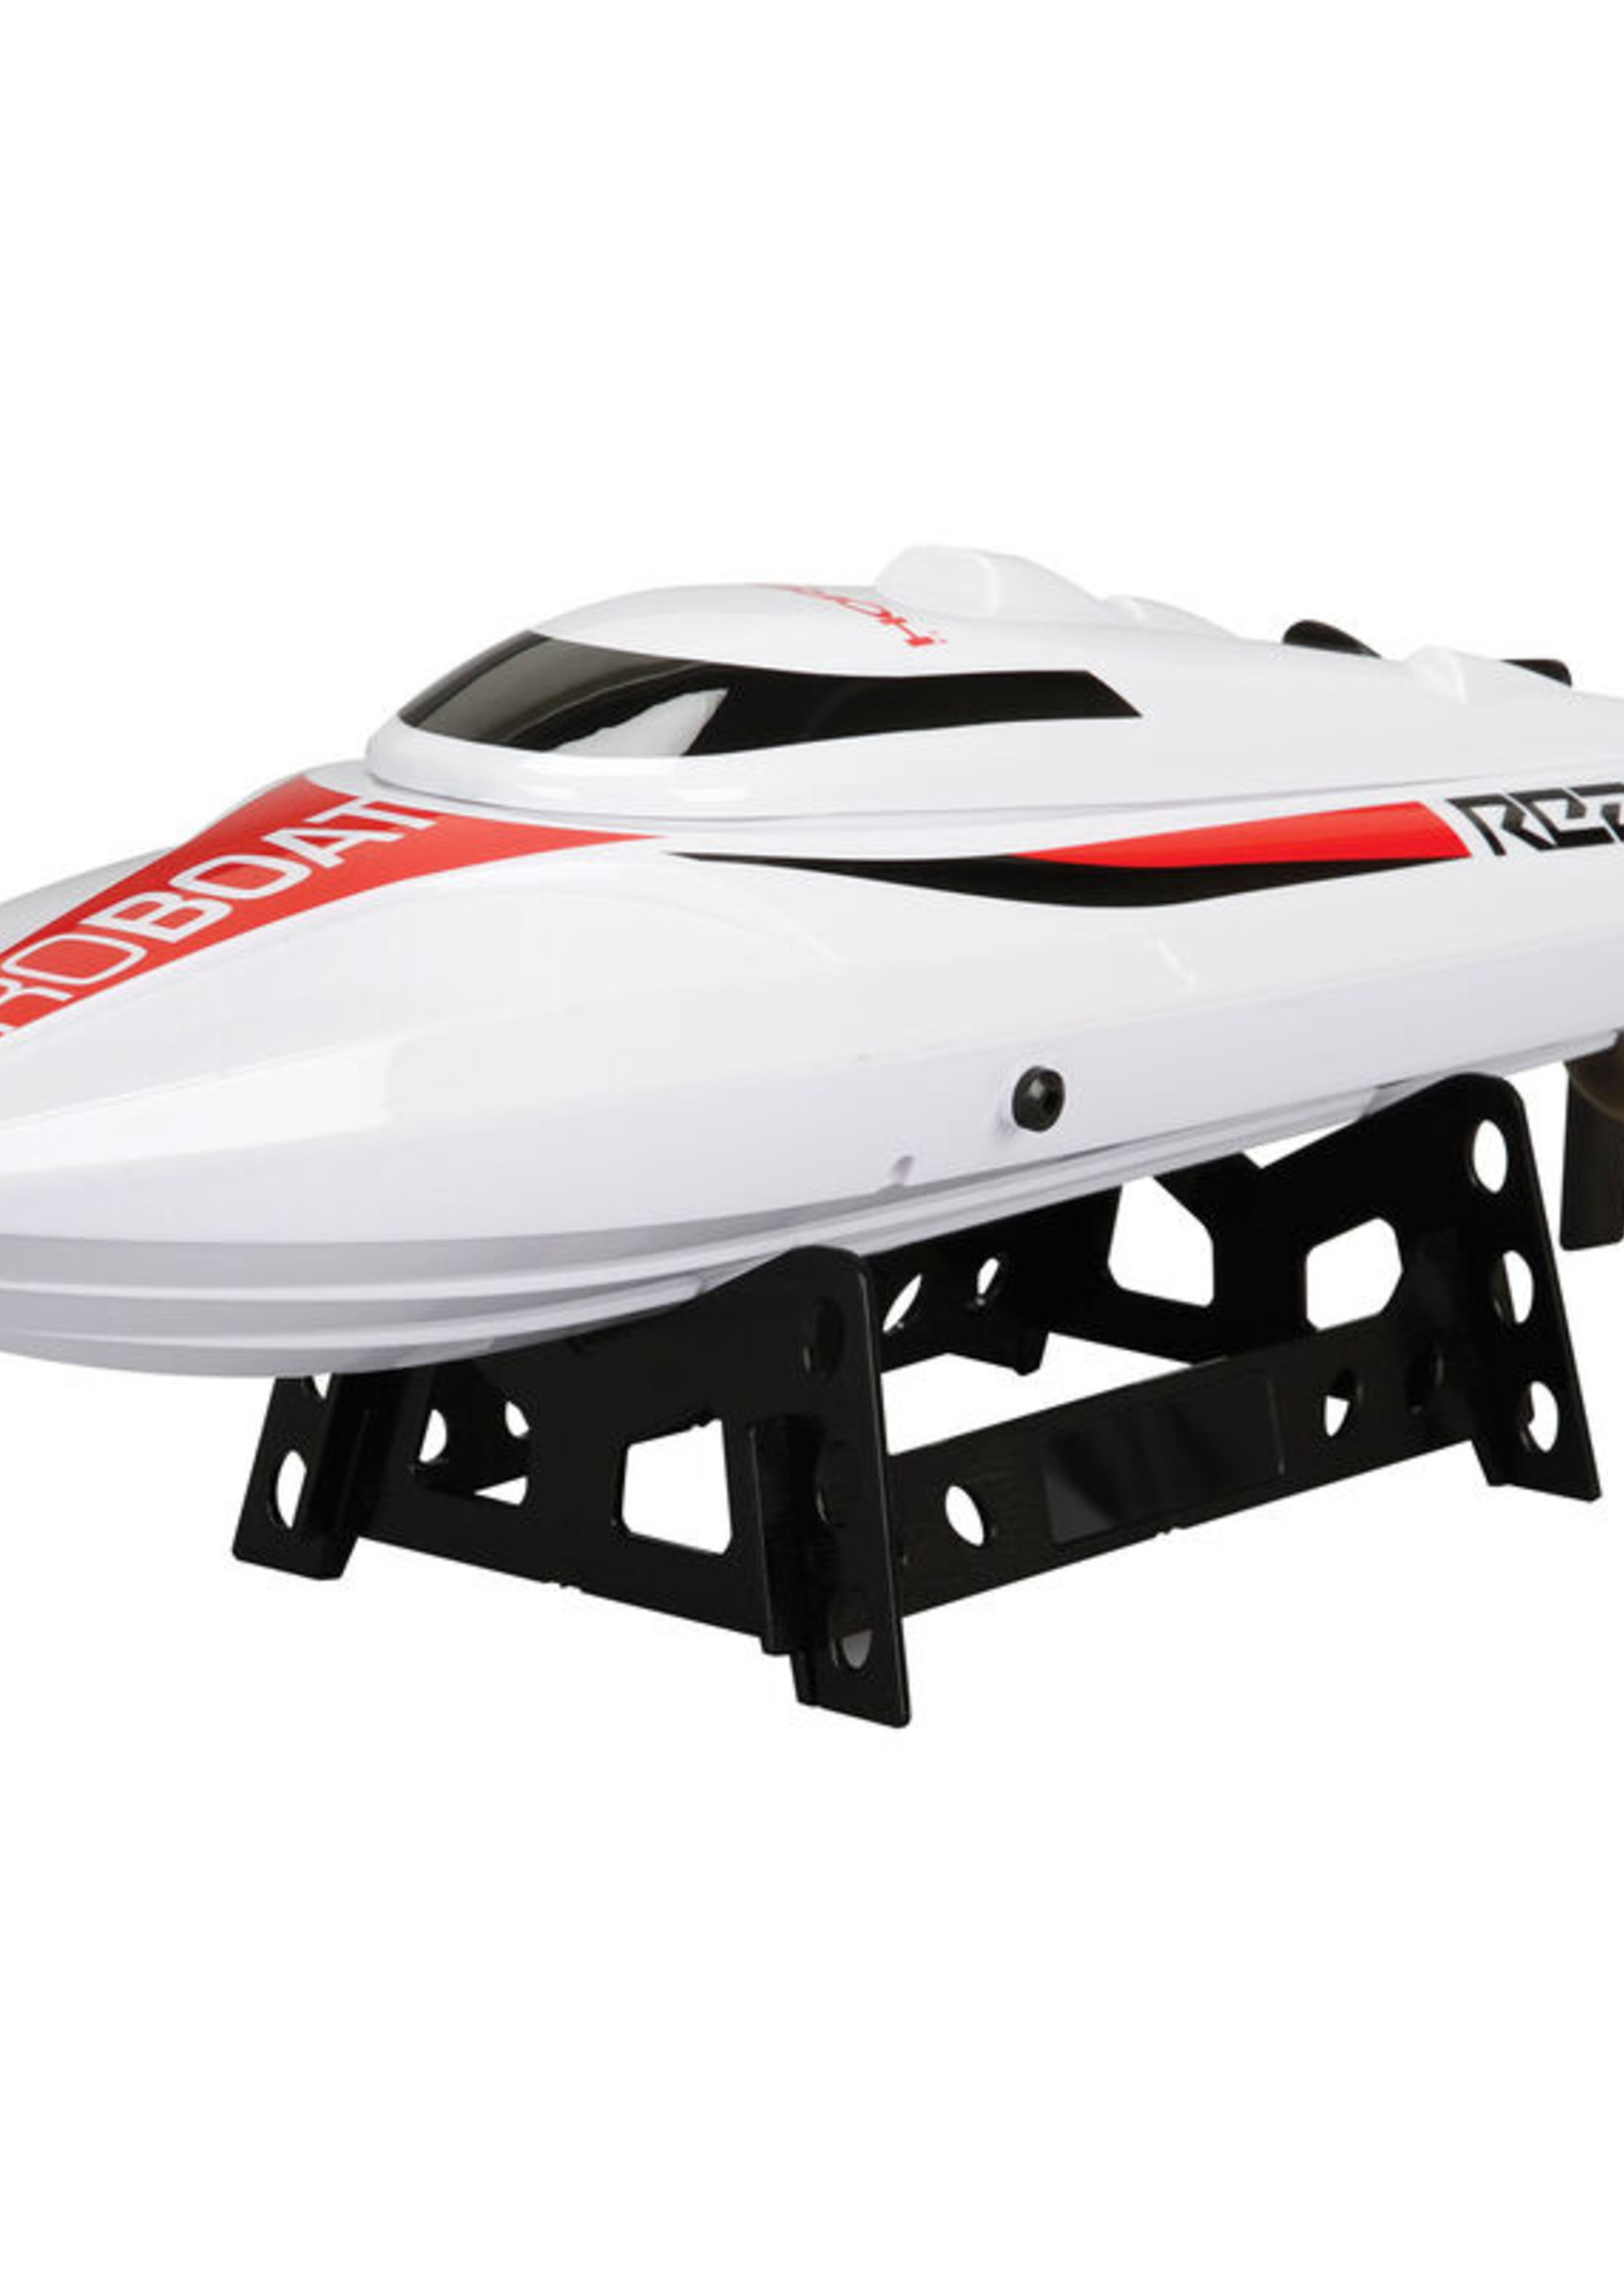 Proboat React 17" Self-Righting Brushed Deep-V 	PRB08024